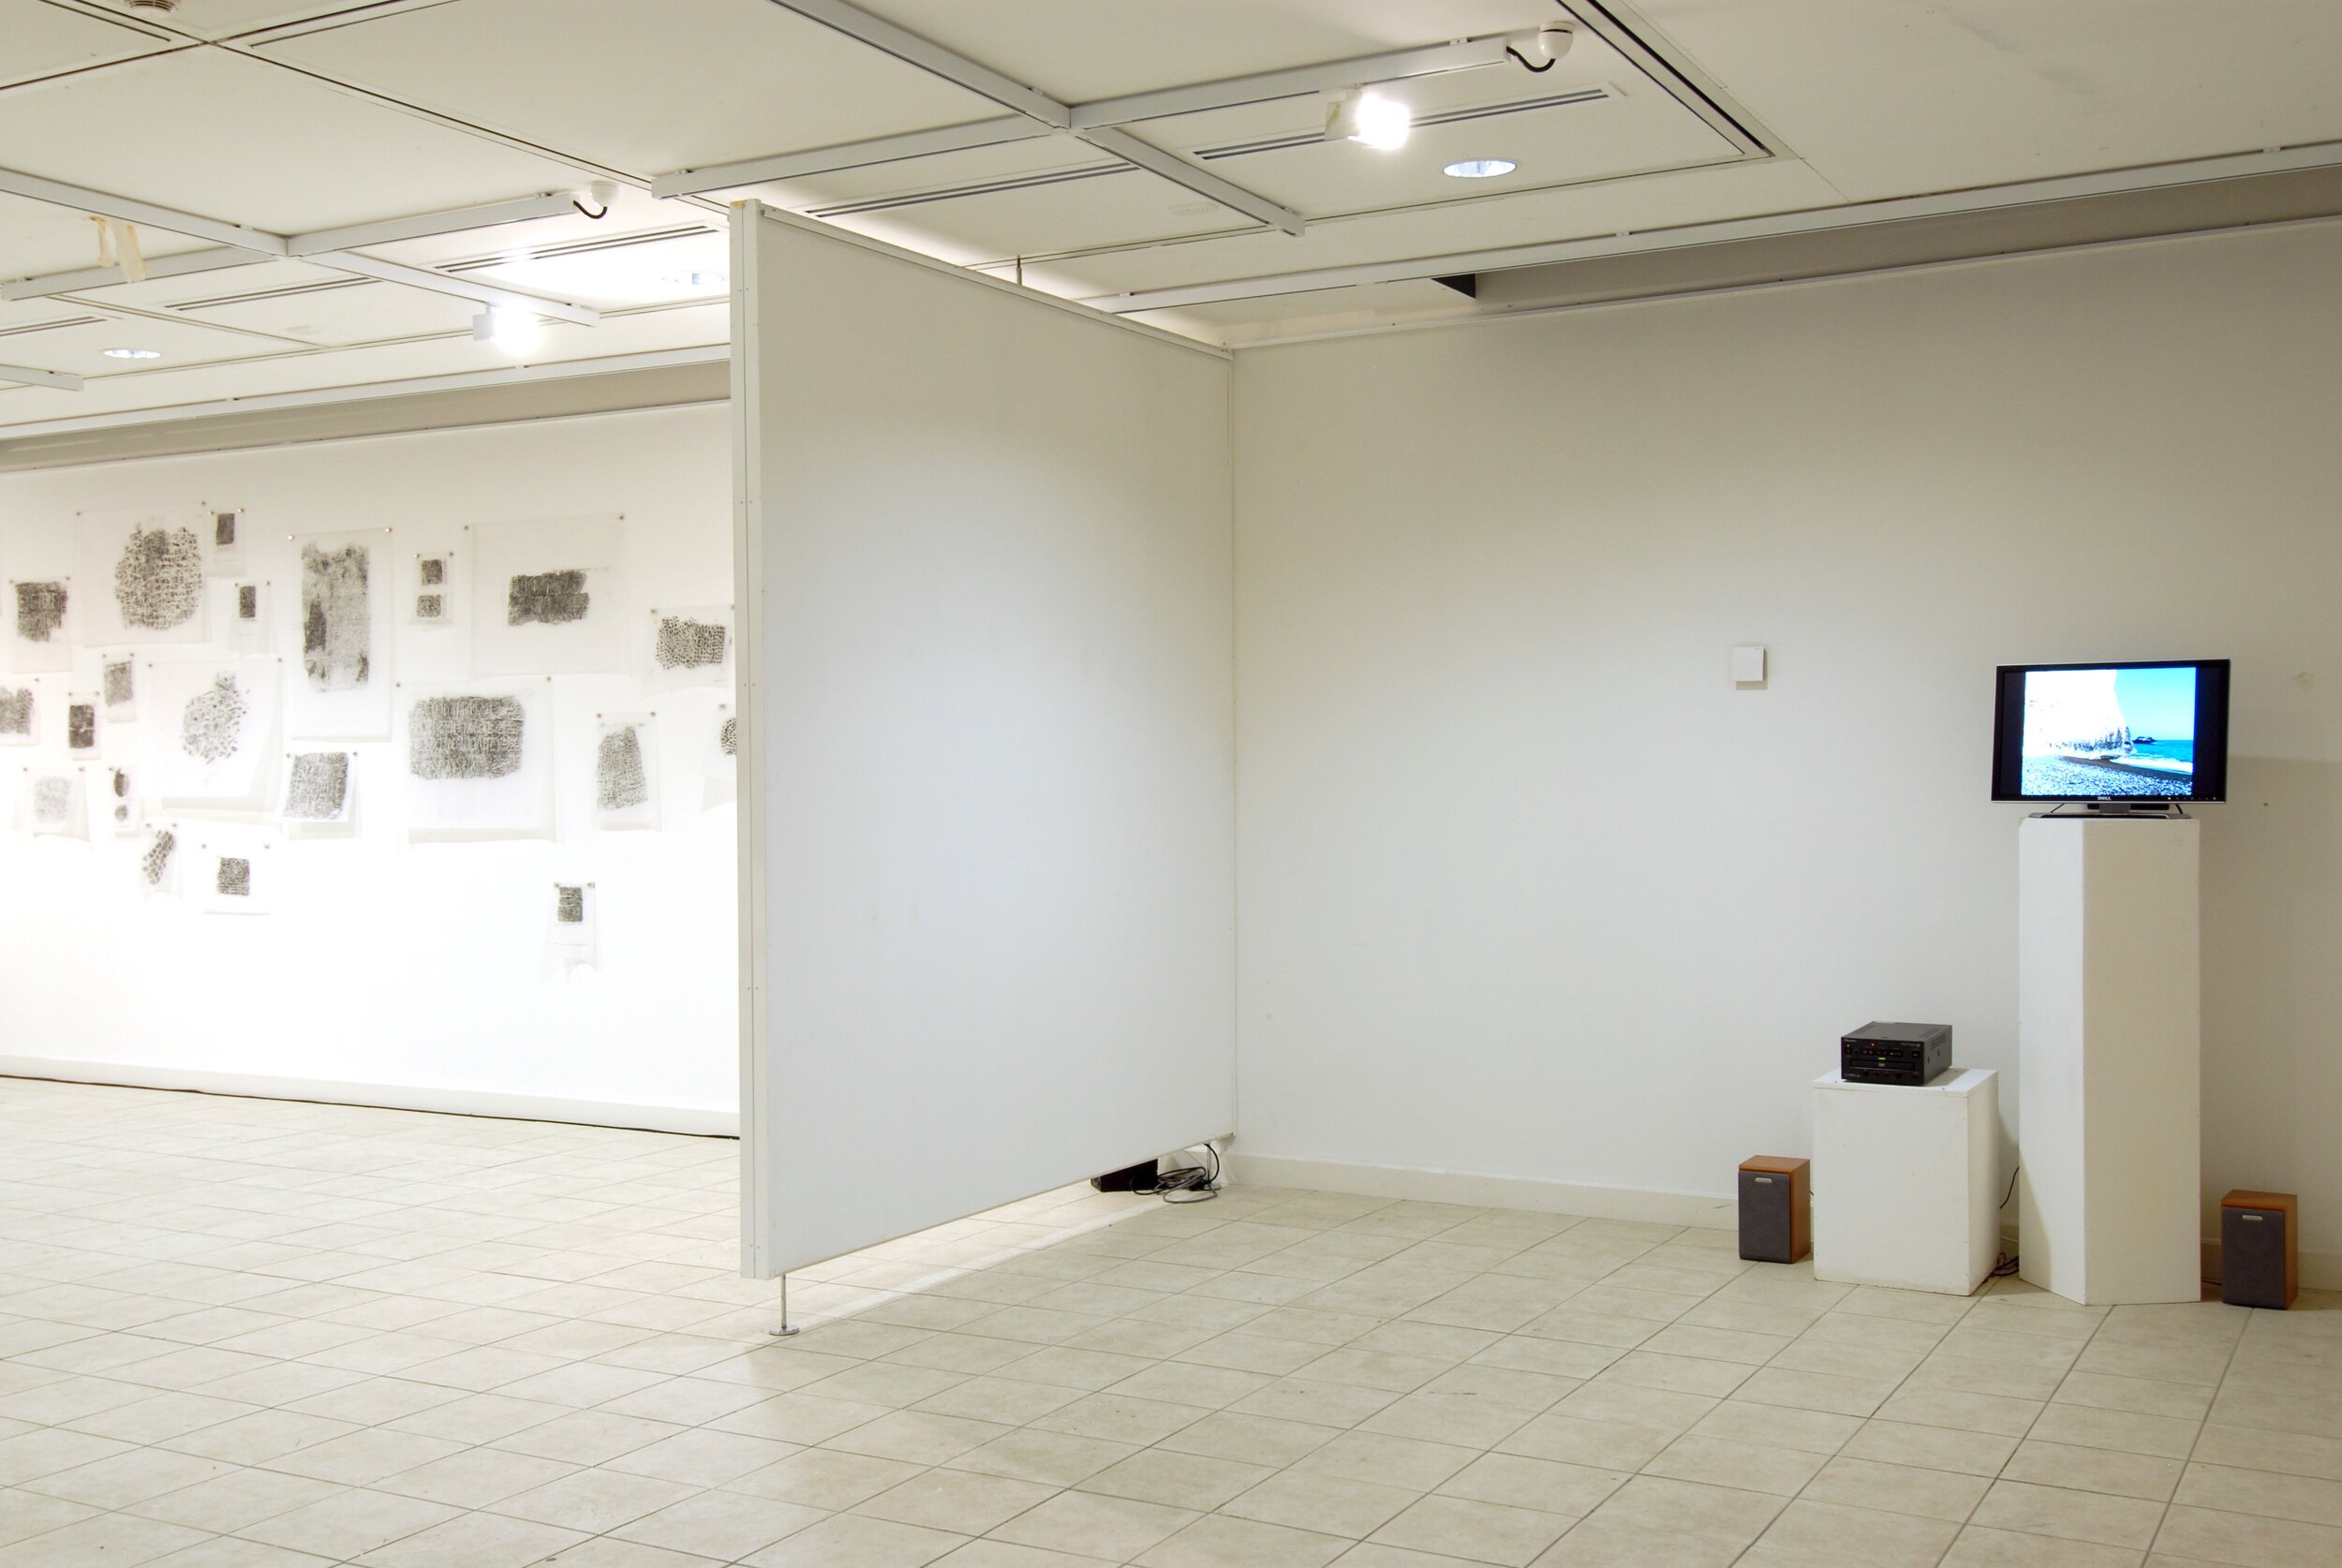  Installation view of work by Diana Wood Conroy (left) and Brogan Bunt (right) from the exhibition  Sonic Architectures: Mapping the Ancient Theatre in Image and Sound, 2006.  Photo: Diana Wood Conroy 